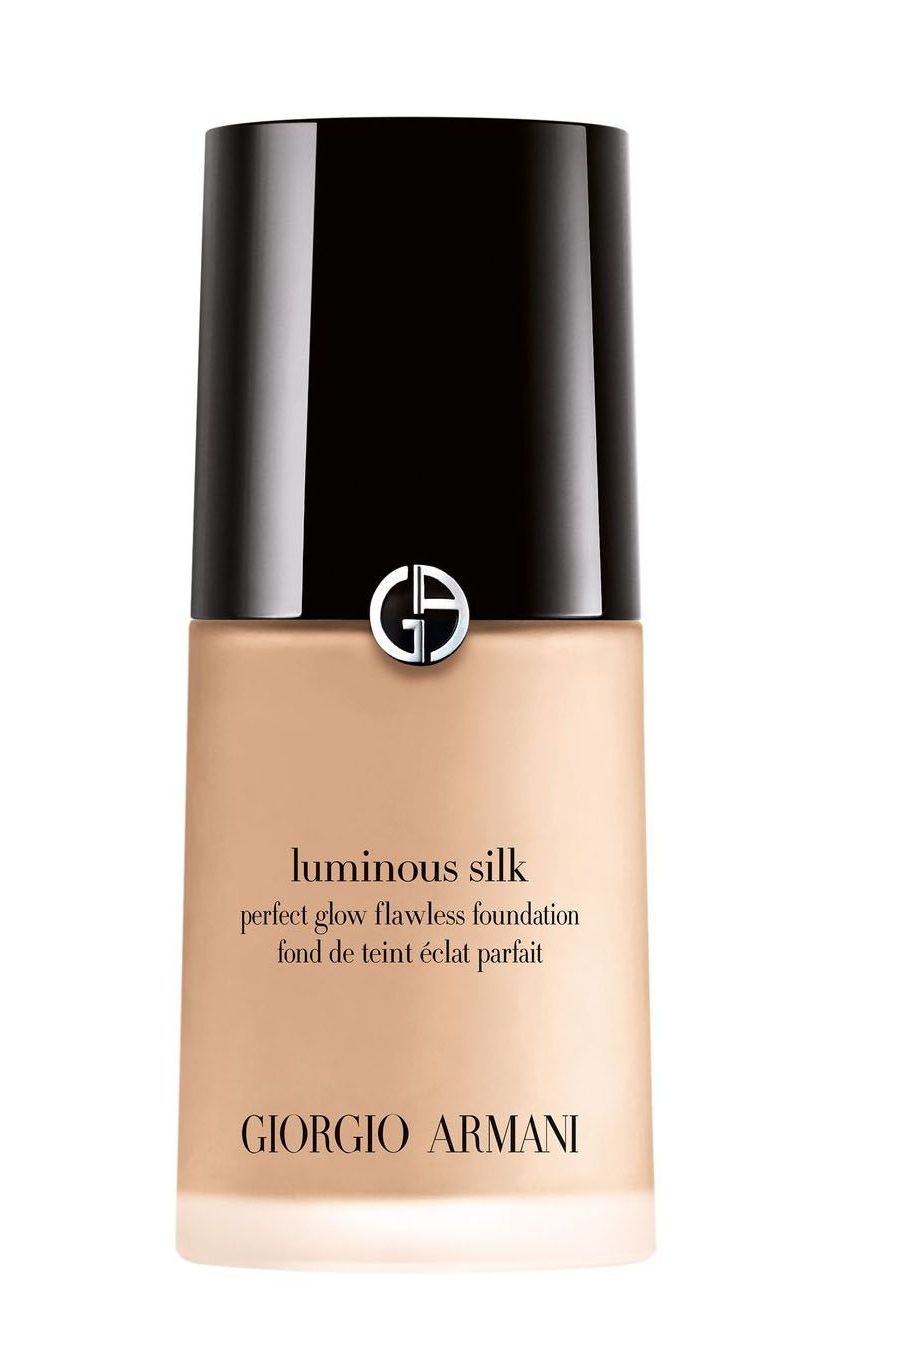 The Best Drugstore Foundation for Mature Skin, According to